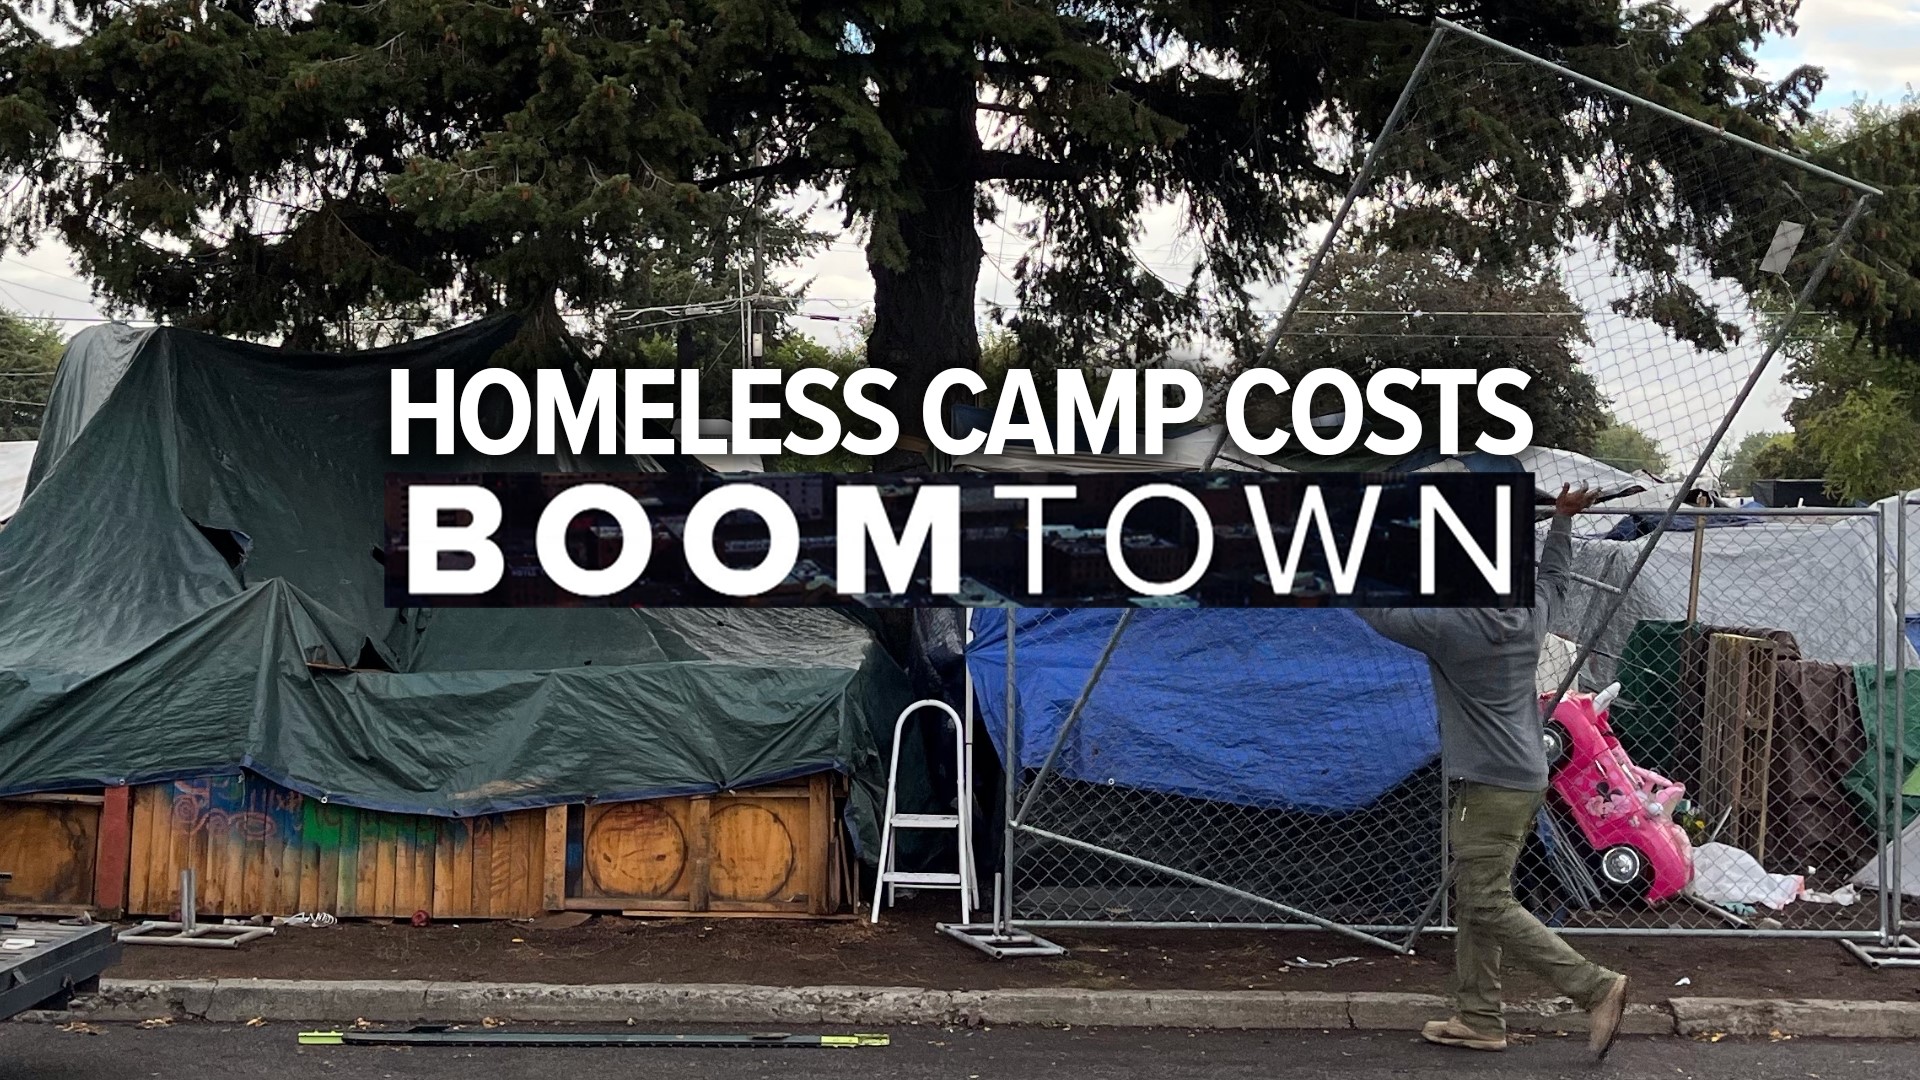 In this Boomtown report, KREM 2 News follows the money to look into how much WSDOT is spending to clean up homeless camps across the state.